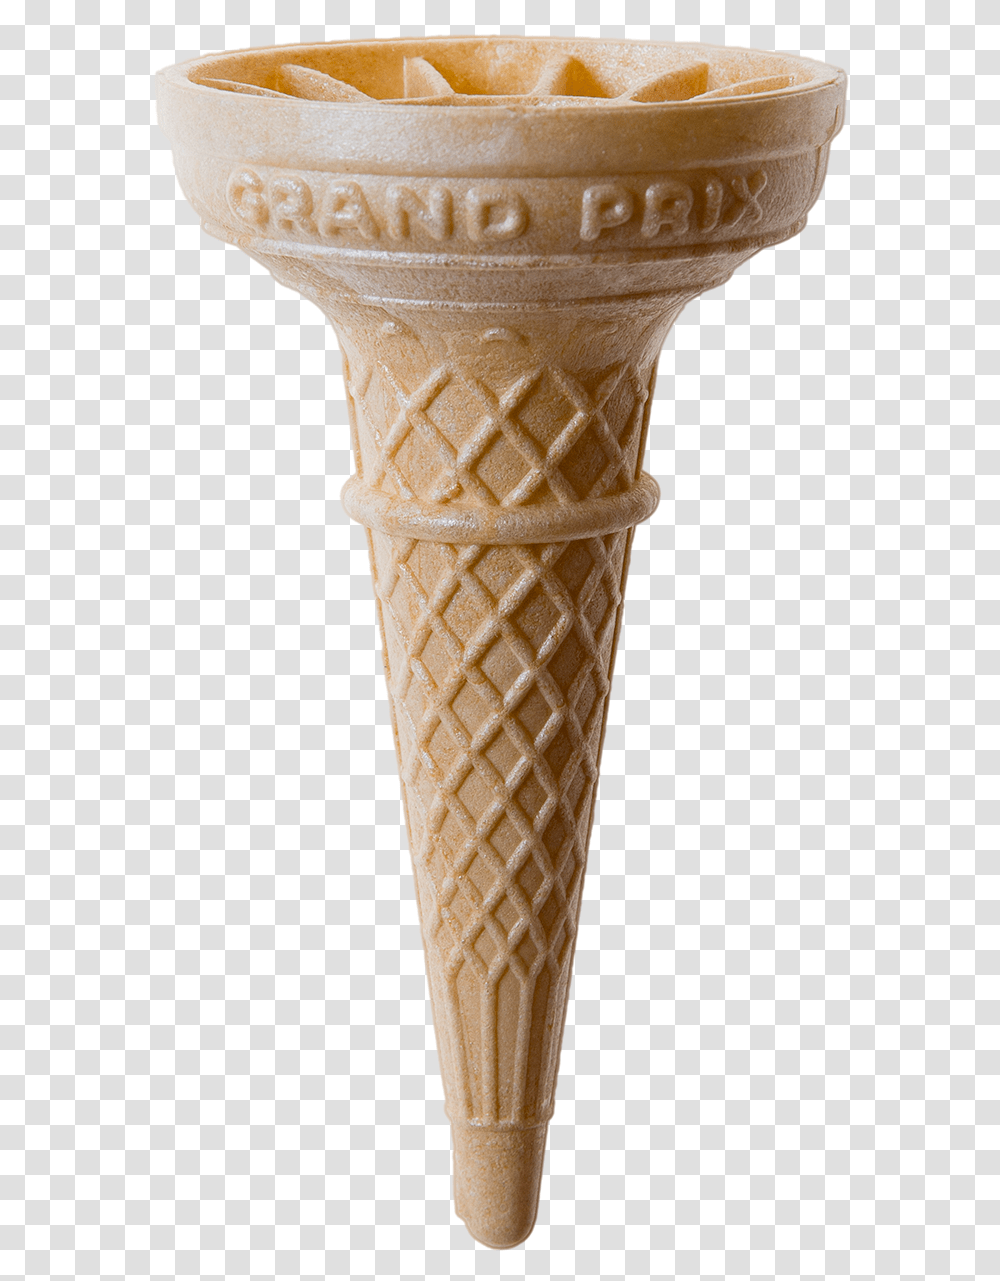 Grand Prix Wafer Cone Ice Cream Cone, Dessert, Food, Creme, Sweets Transparent Png